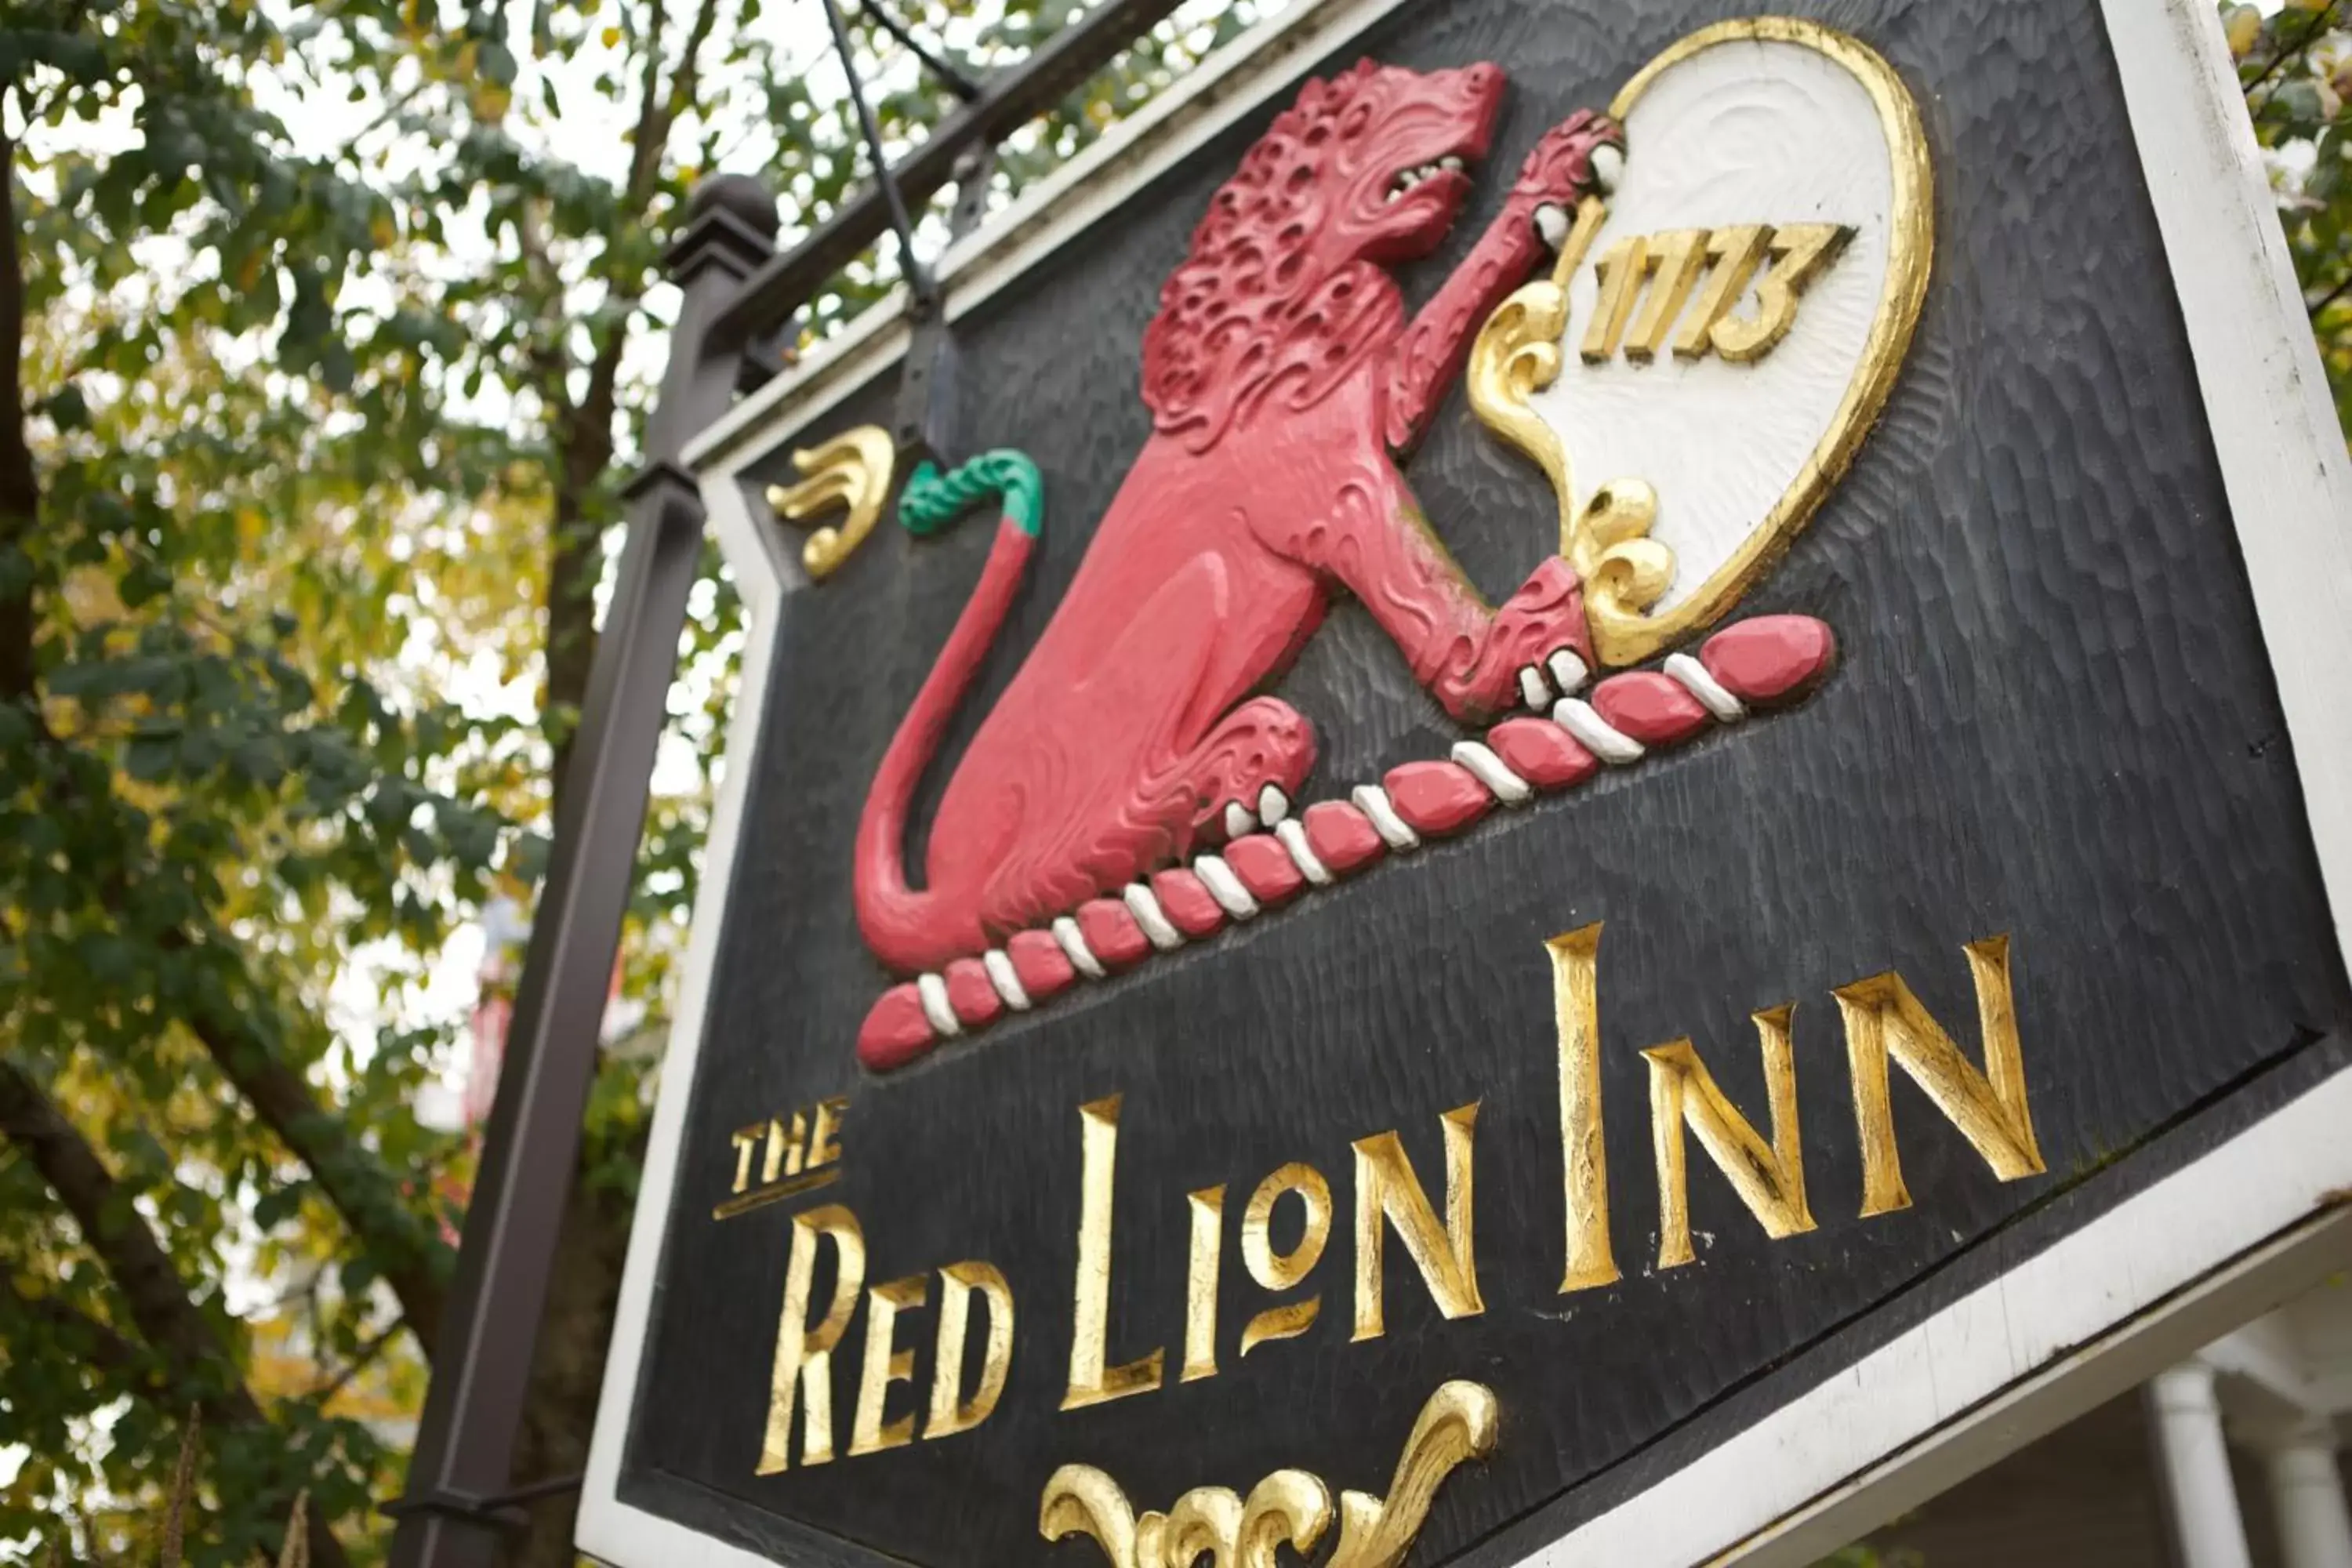 Property logo or sign in The Red Lion Inn